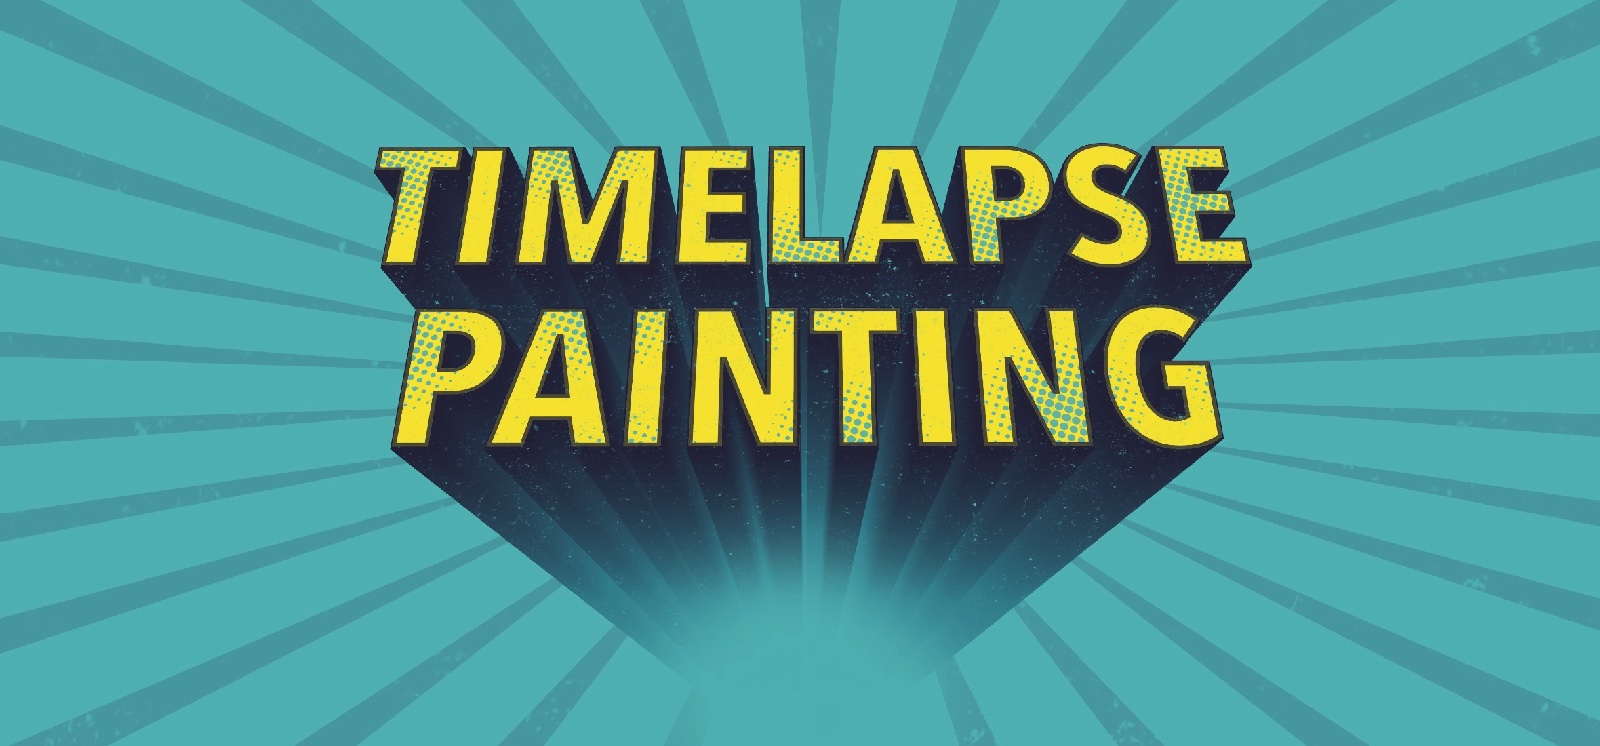 Timelapse Painting Youtube Videos